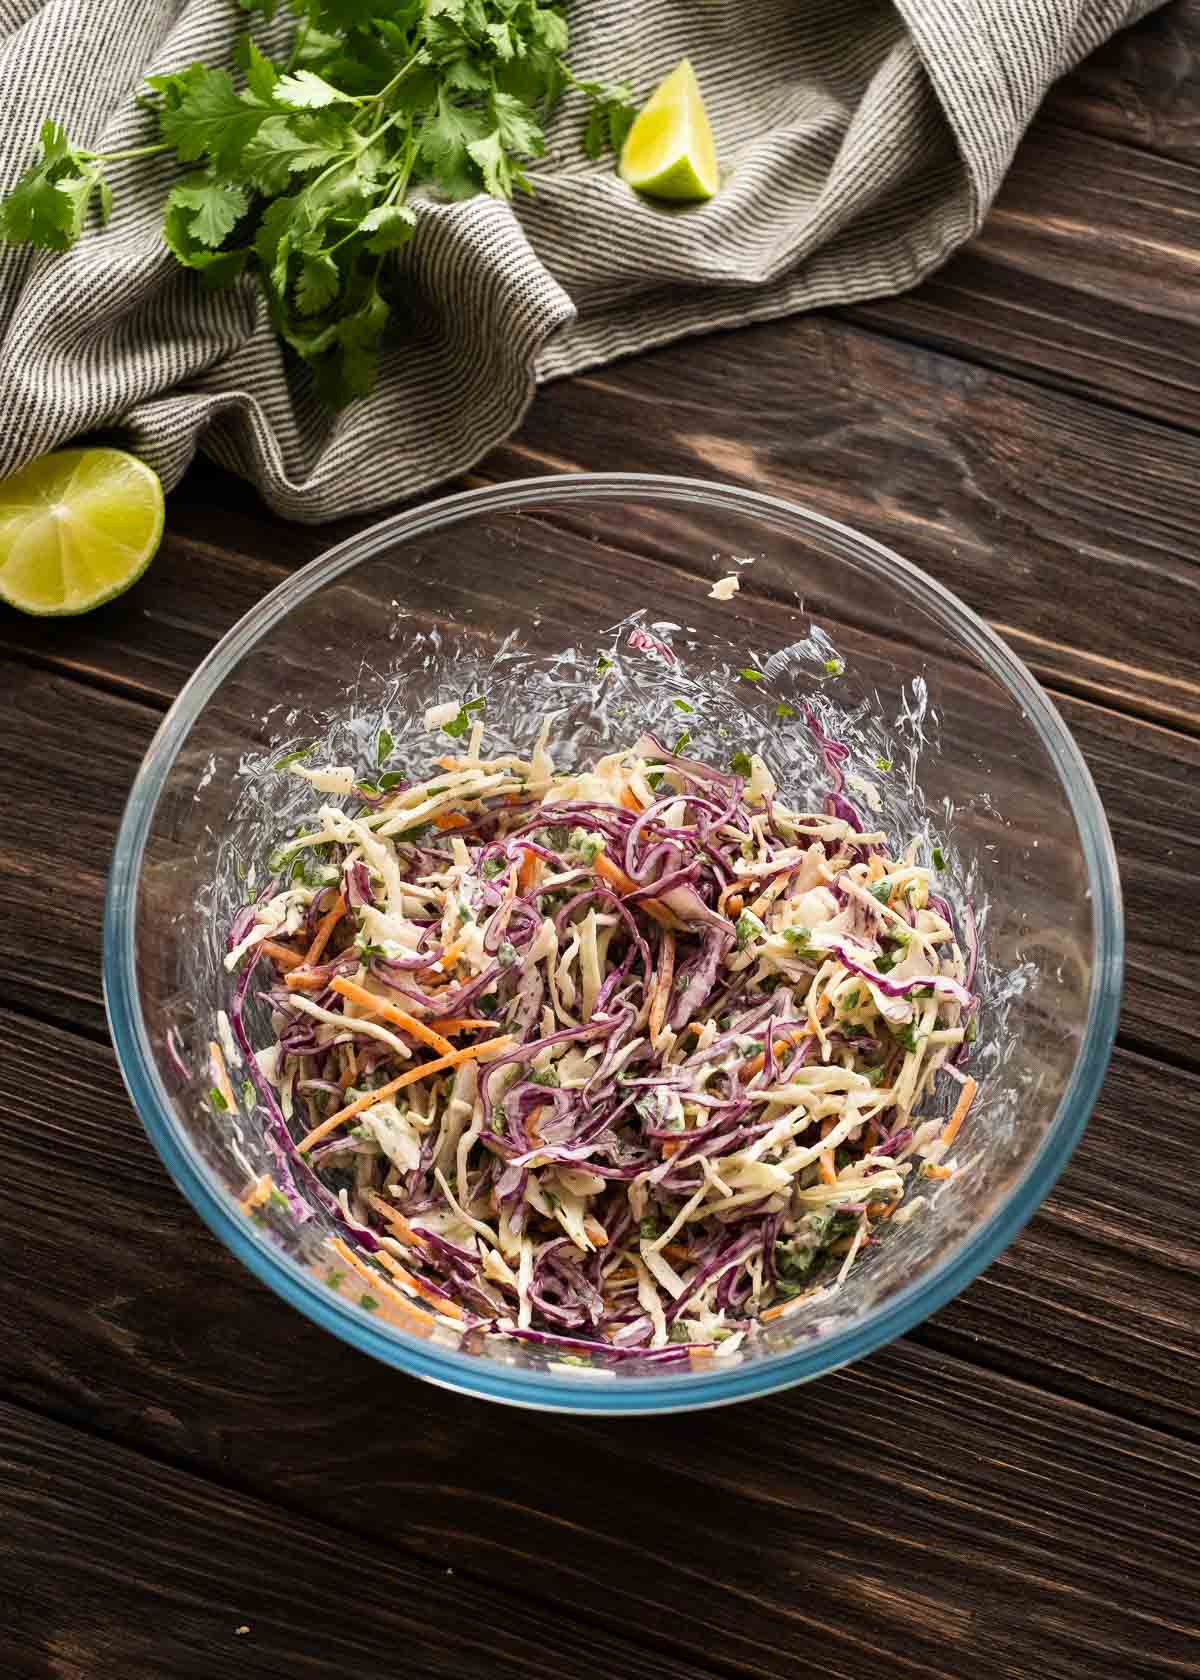 slaw ingredients being mixed in a clear mixing bowl